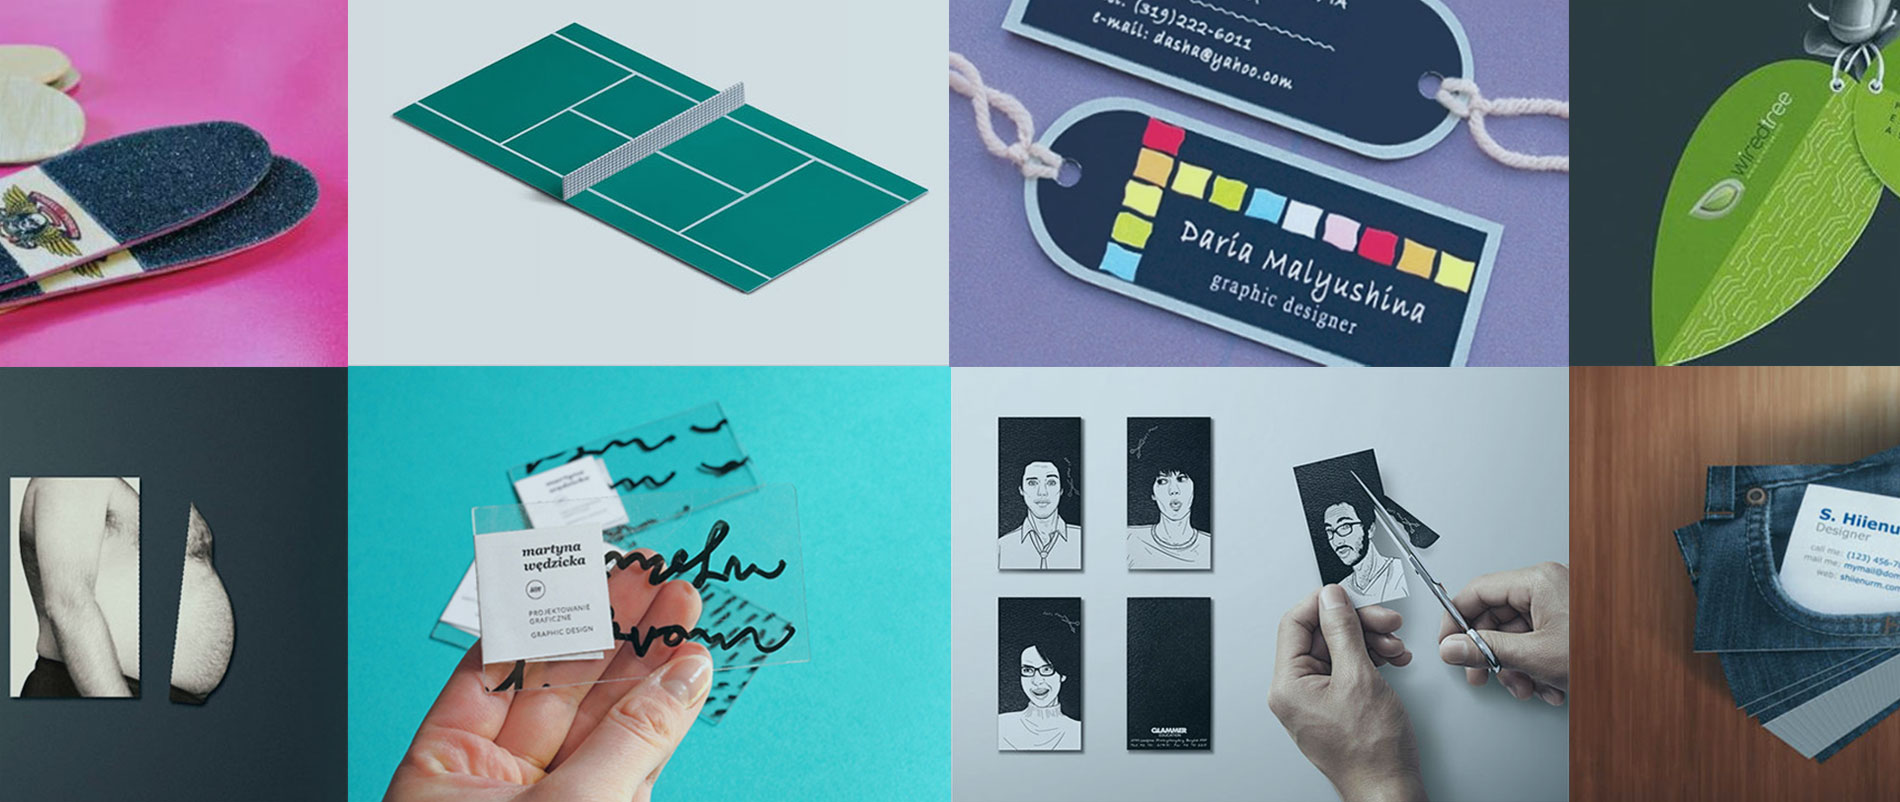 creative ways to distribute business cards 2